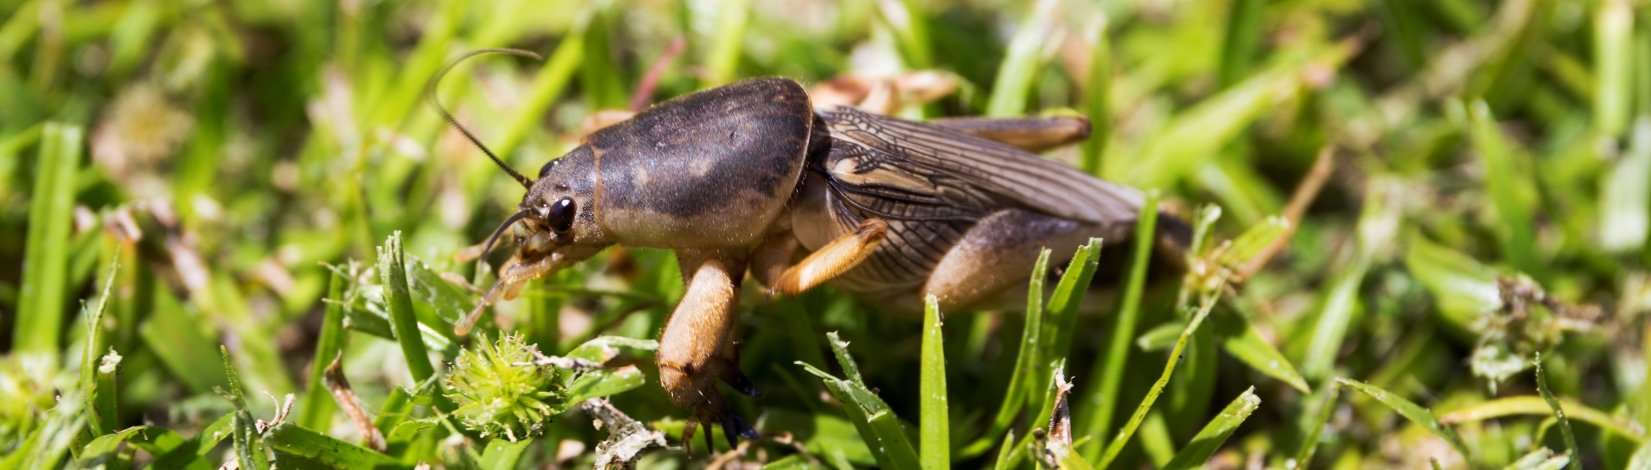 Magnified picture of a mole cricket in grass